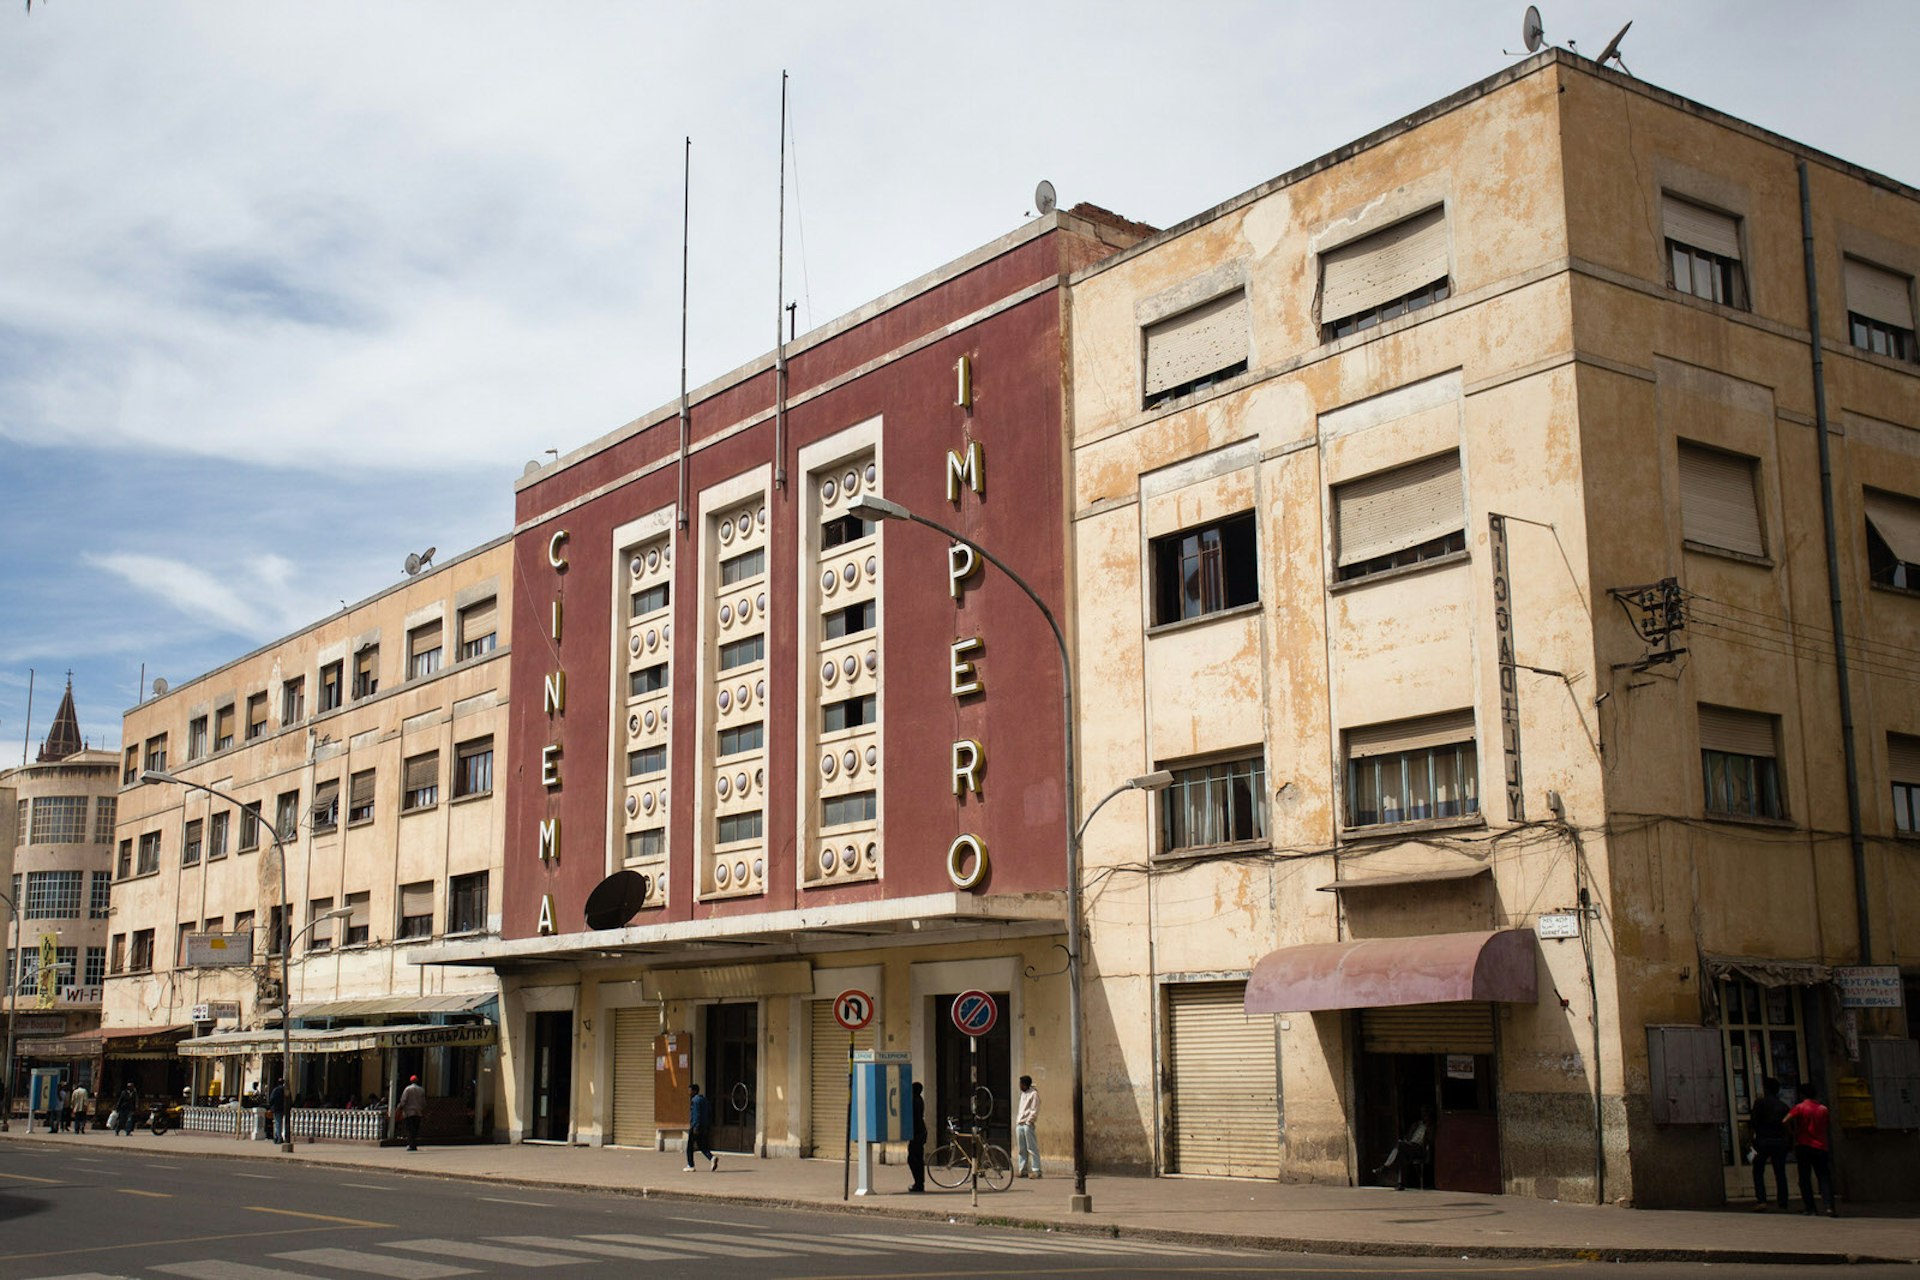 Flanked by two bland, sand-coloured buildings is the red, sleek-looking Cinema Imperio. Above the cantelevered cement awning that runs the length of the building are three symetrical rows of window climbing vertically up the building. On one side of them 'CINEMA' is written vertically in bold gold letters, on the other side is 'IMPERIO' 